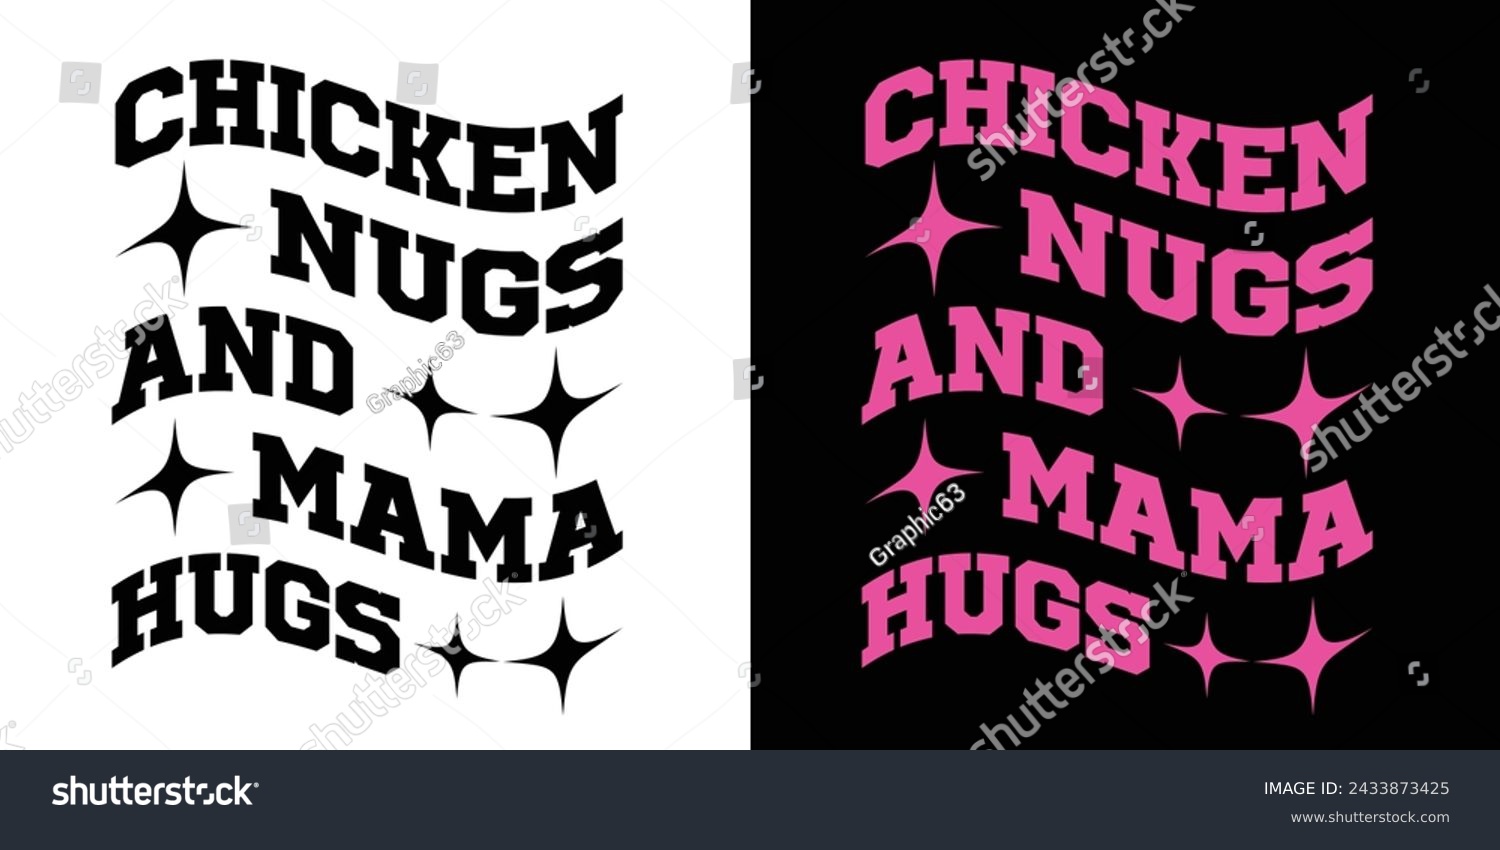 SVG of Chicken Nugs And Mama Hugs. Motivational Typography Quotes Print For T Shirt, Poster, Banner Design Vector Eps Illustration. svg